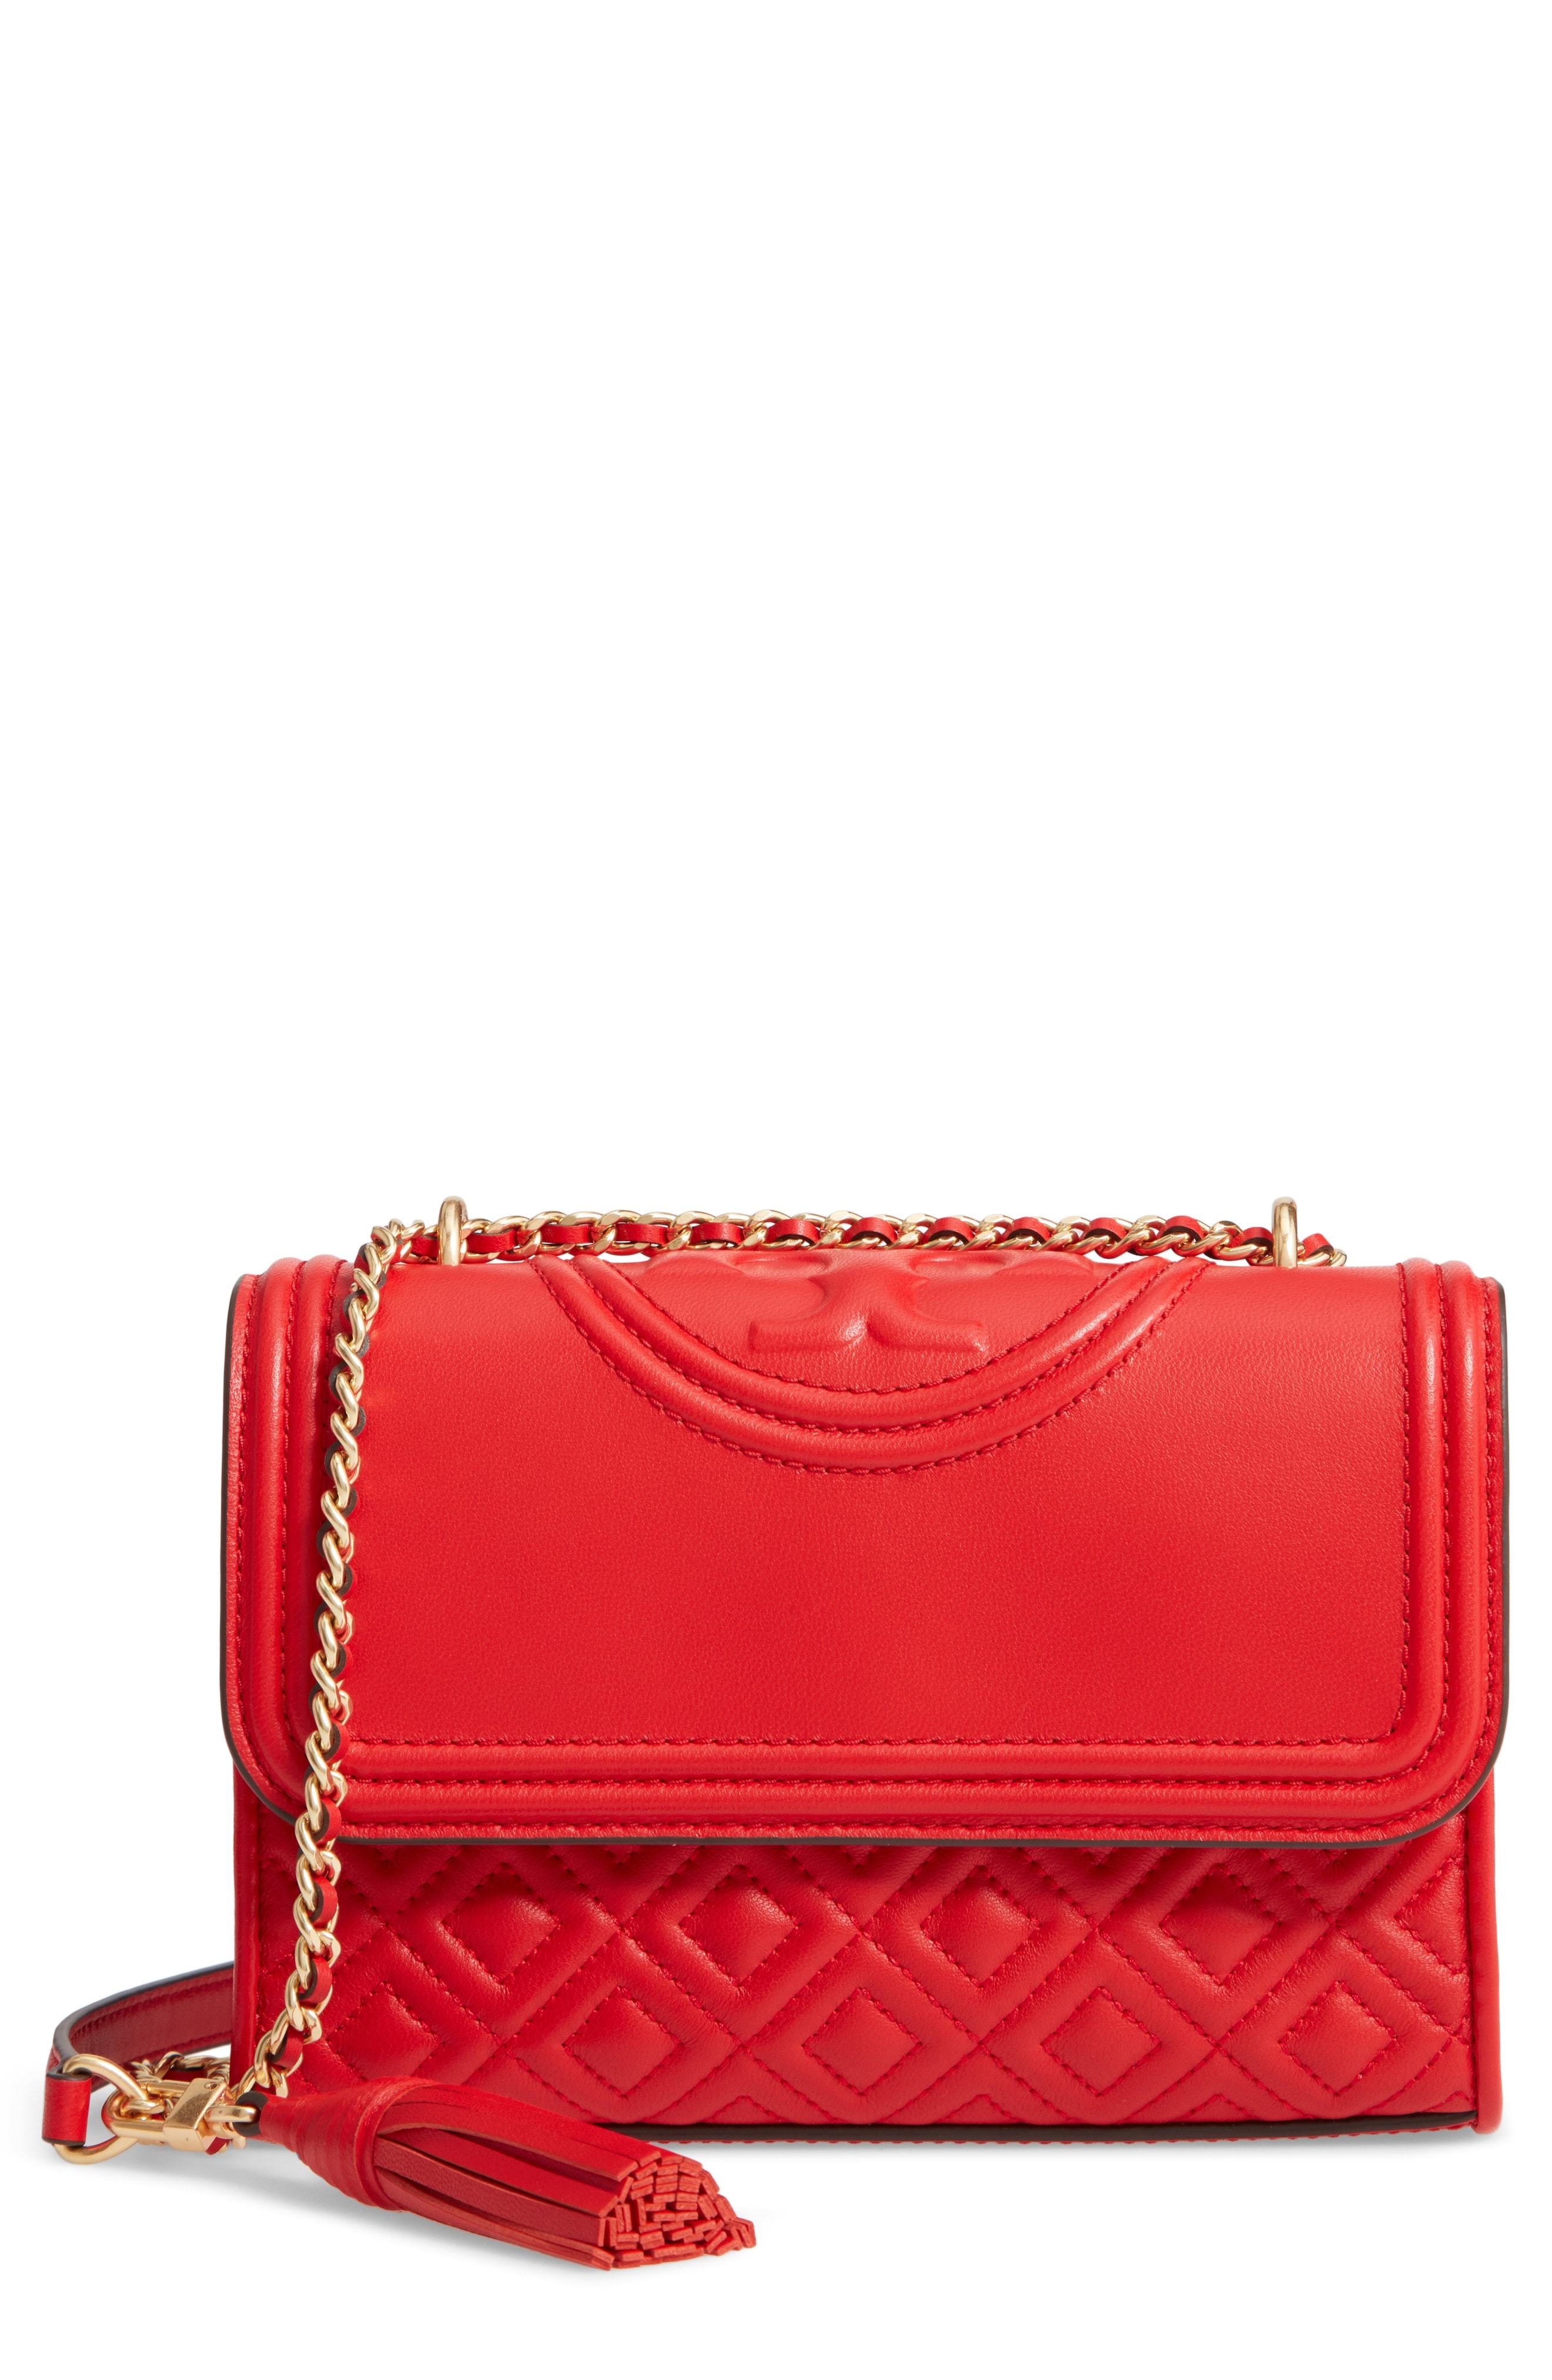 Tory Burch Small Fleming Leather Convertible Shoulder Bag, $458 | Nordstrom  | Lookastic